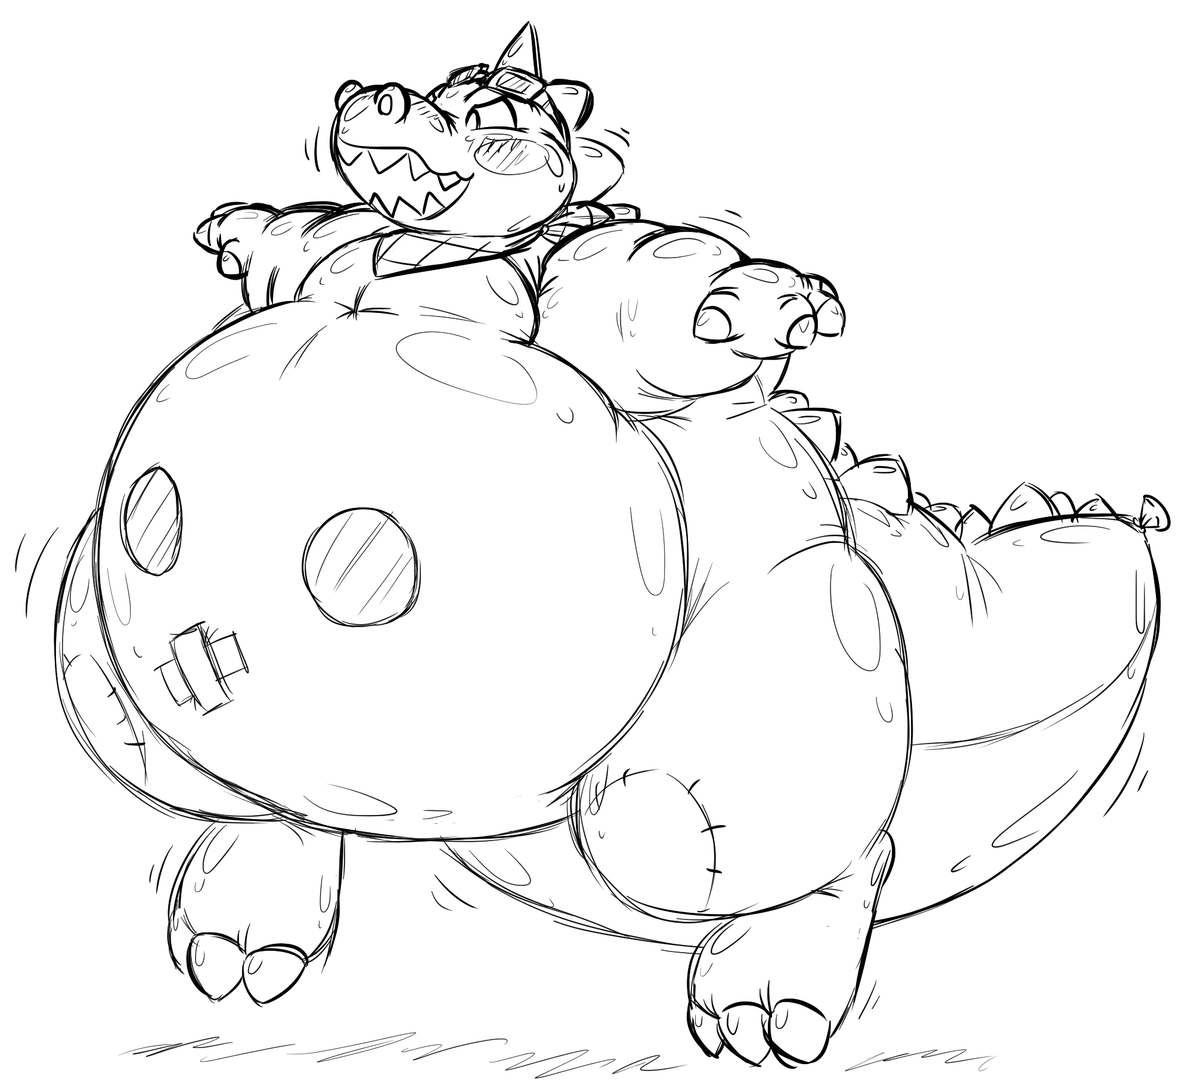 Another big inflatable boss a friend told me about, big 'bouncehouse' dragon balloon bliss version. >//<
(Belly has windows if anyone wants to rent that free room inside me)